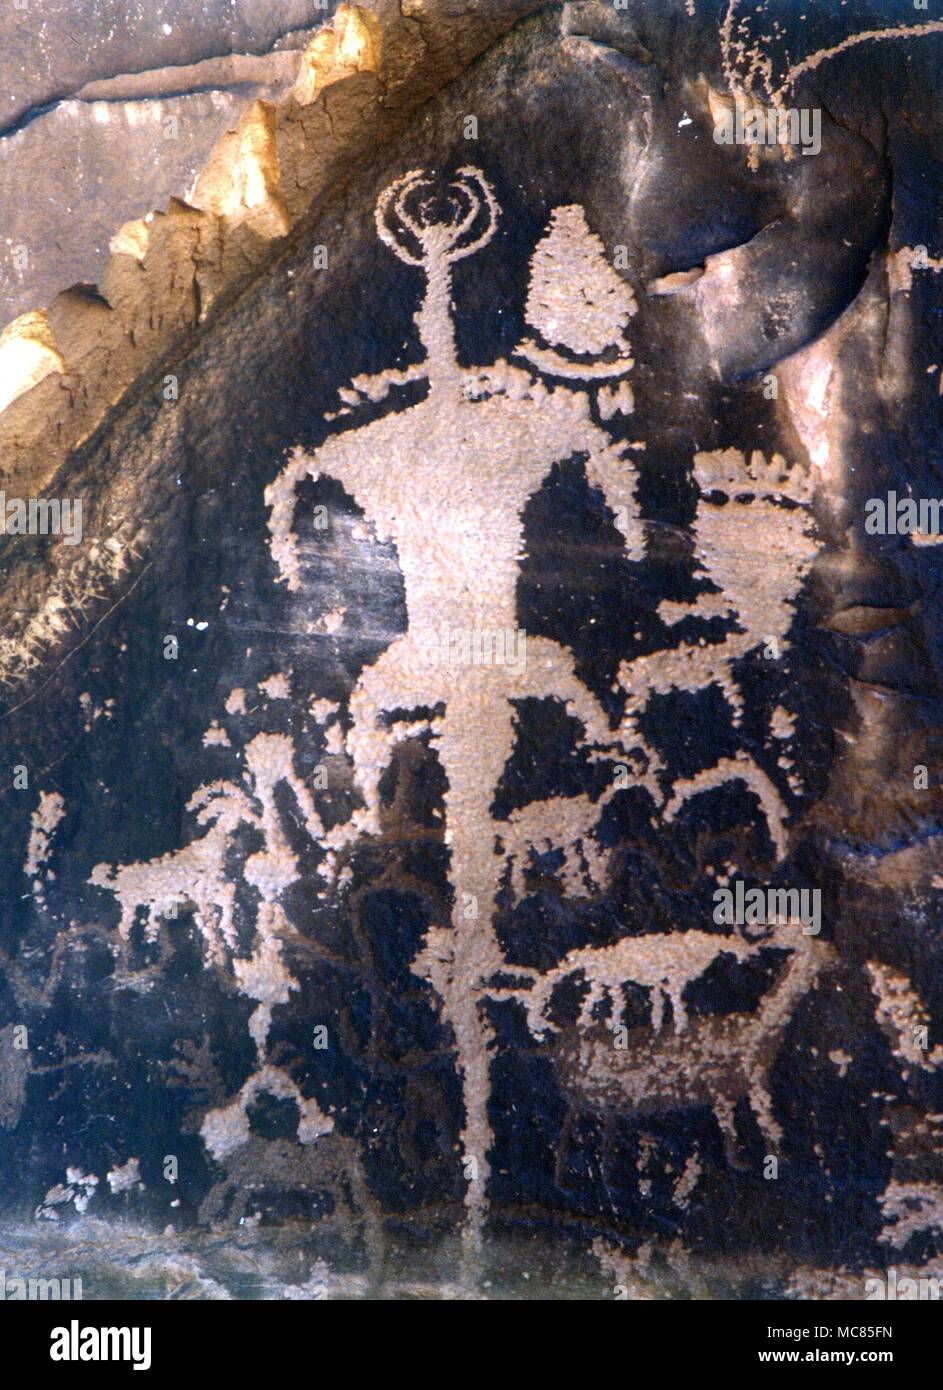 Petroglyphs - North American Indians. Incised and painted designs (petroglyphs) depicting (mainly) a horned medicine-man with a long tail. Such images have been claimed, by some, to depict aliens from space. These petroglyphs are on the so-called Newspaper Rock, in the Utah desert. Stock Photo